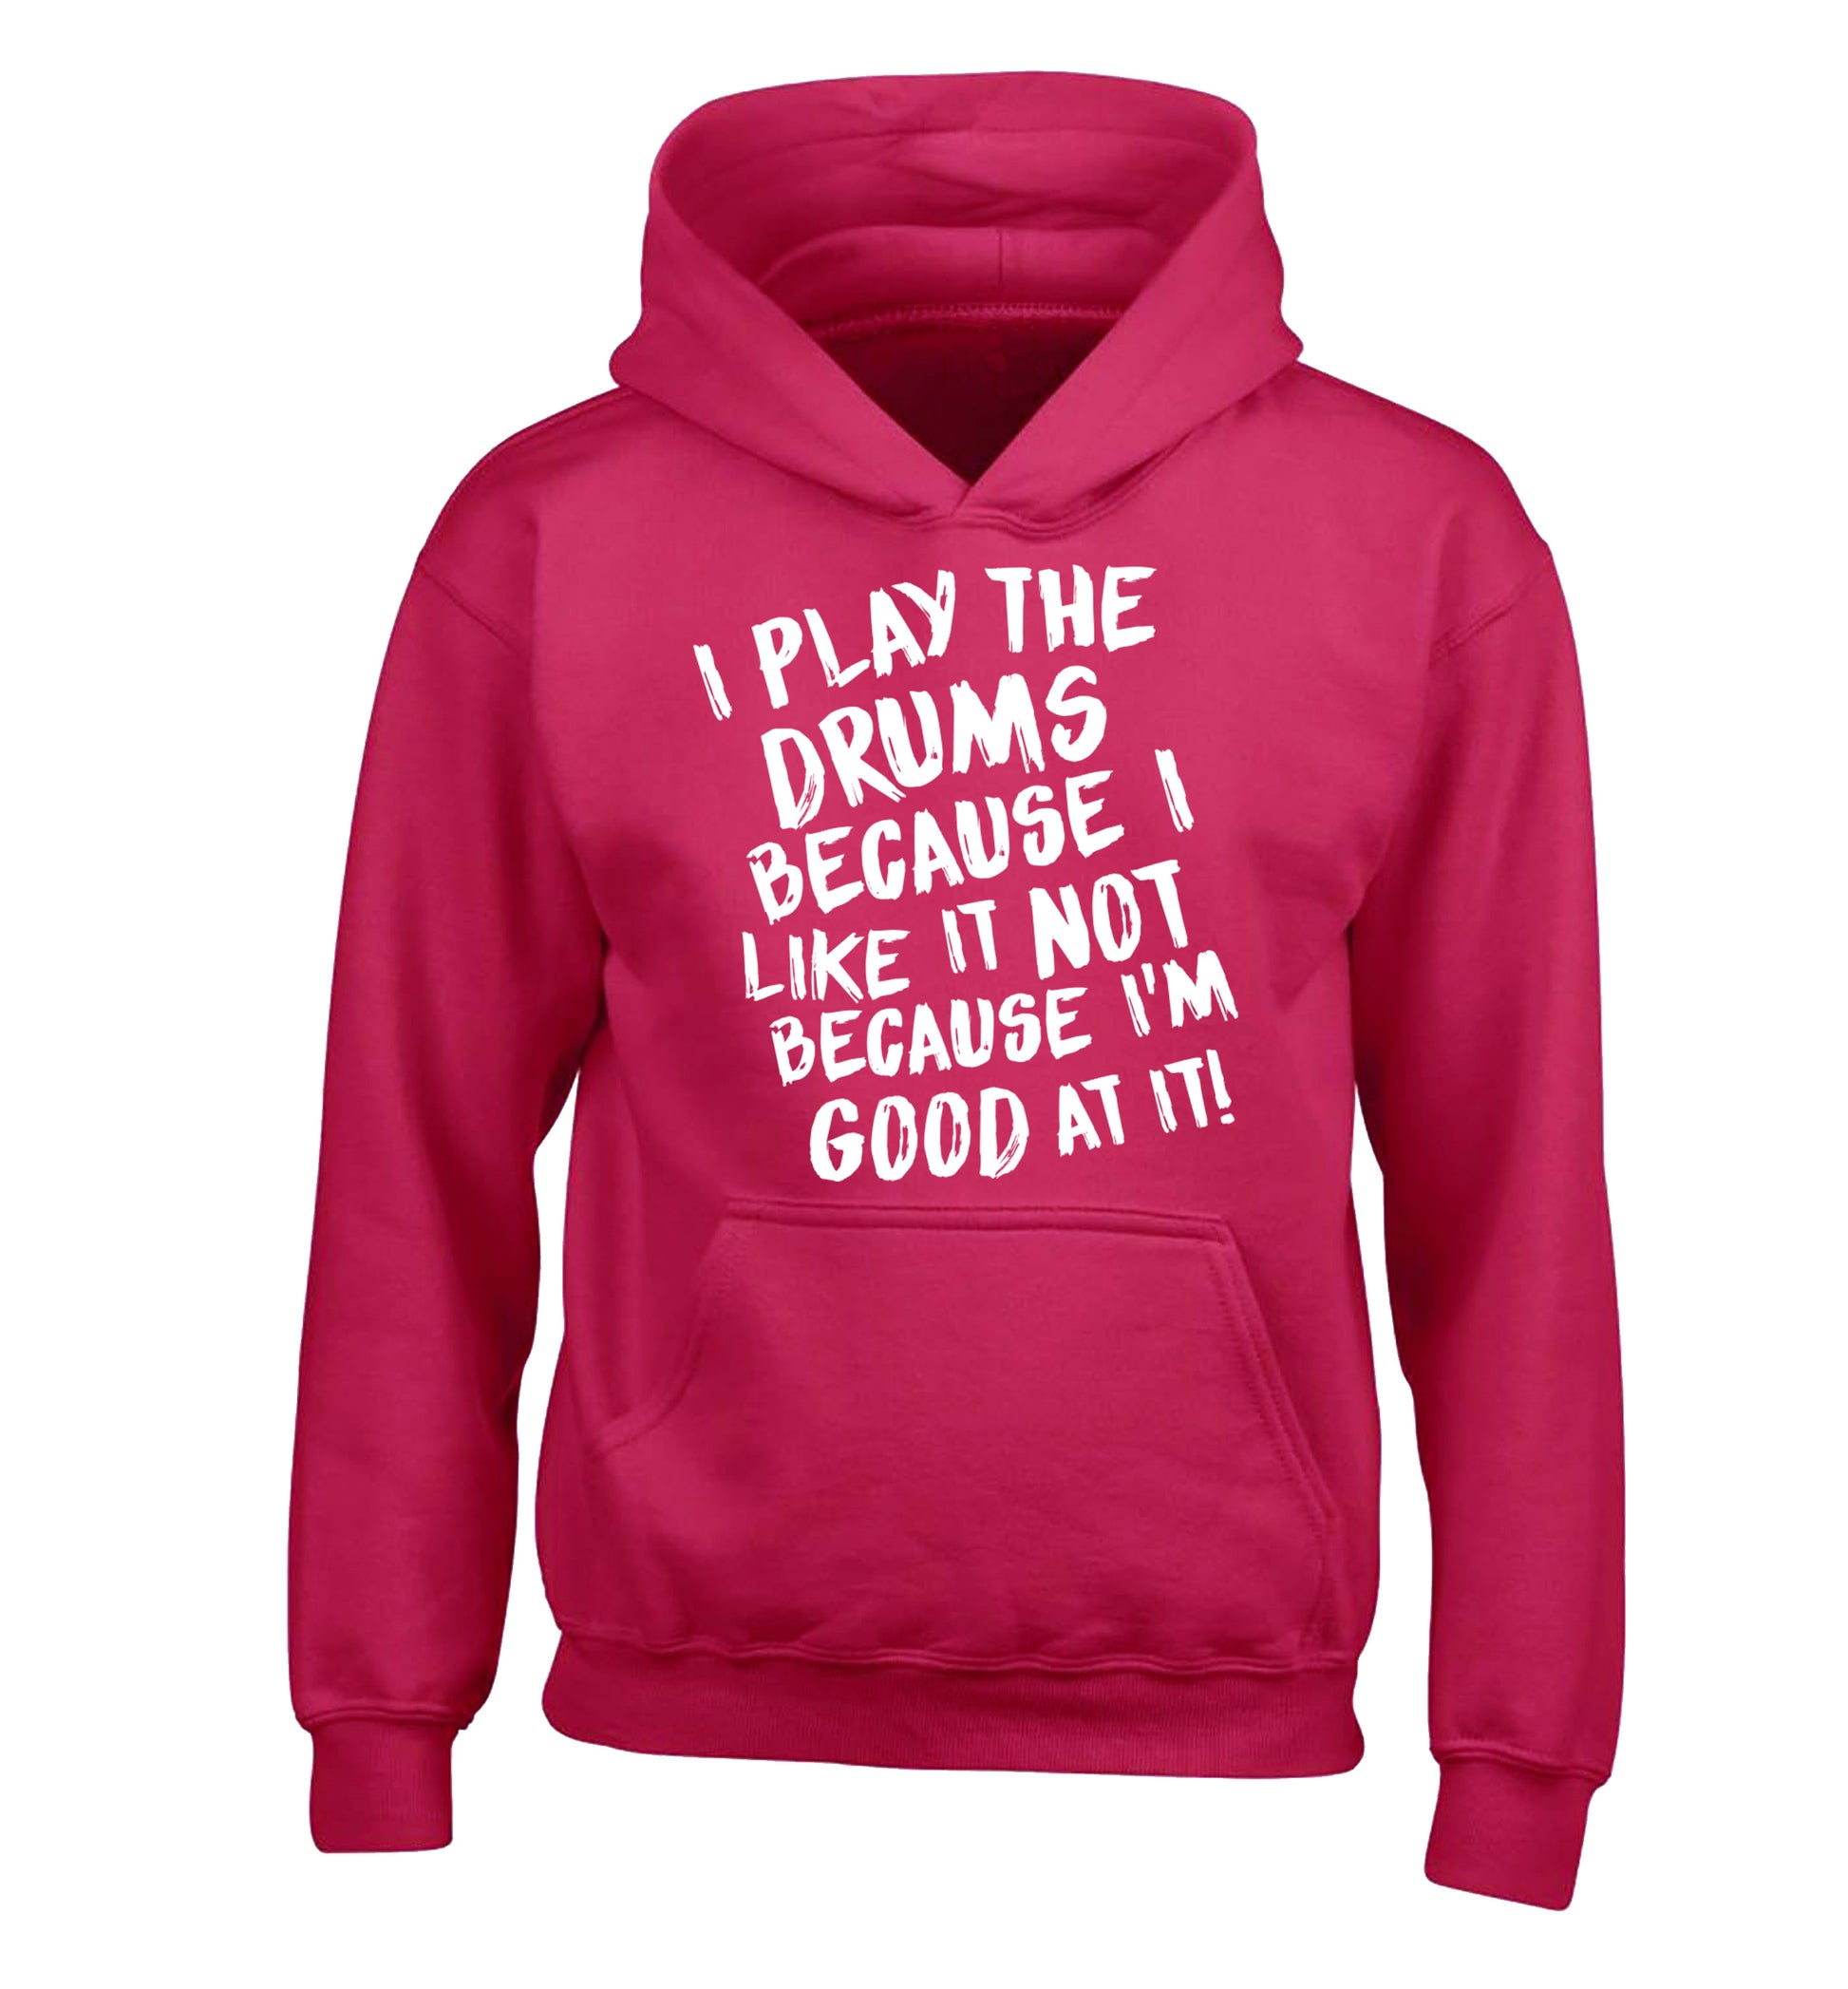 I play the drums because I like it not because I'm good at it children's pink hoodie 12-14 Years